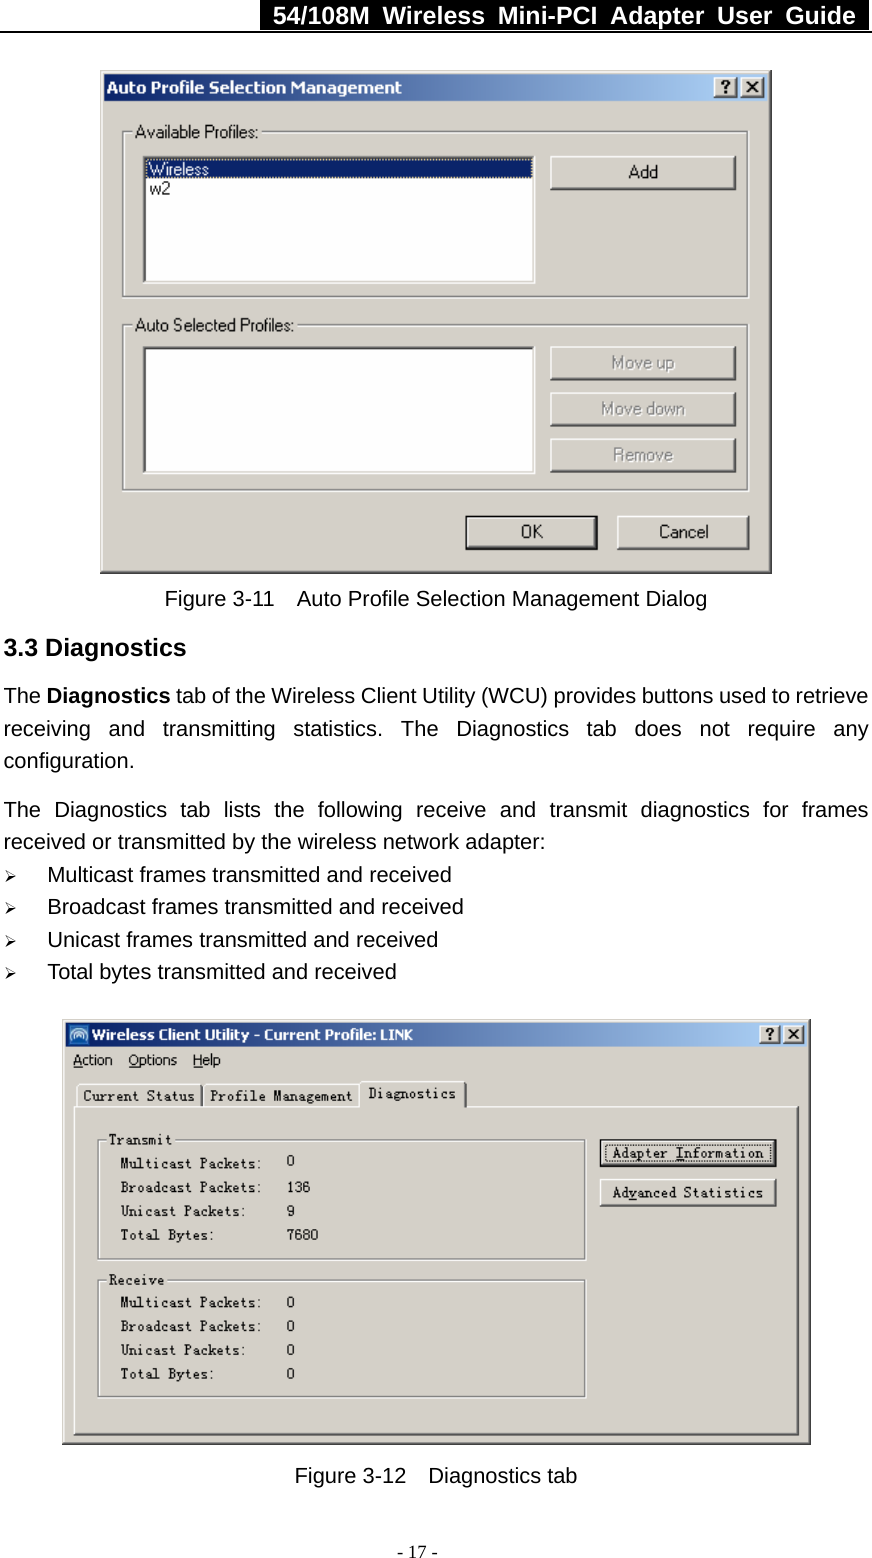   54/108M Wireless Mini-PCI Adapter User Guide  - 17 -  Figure 3-11    Auto Profile Selection Management Dialog 3.3 Diagnostics The Diagnostics tab of the Wireless Client Utility (WCU) provides buttons used to retrieve receiving and transmitting statistics. The Diagnostics tab does not require any configuration.   The Diagnostics tab lists the following receive and transmit diagnostics for frames received or transmitted by the wireless network adapter: ¾ Multicast frames transmitted and received   ¾ Broadcast frames transmitted and received   ¾ Unicast frames transmitted and received   ¾ Total bytes transmitted and received  Figure 3-12  Diagnostics tab 